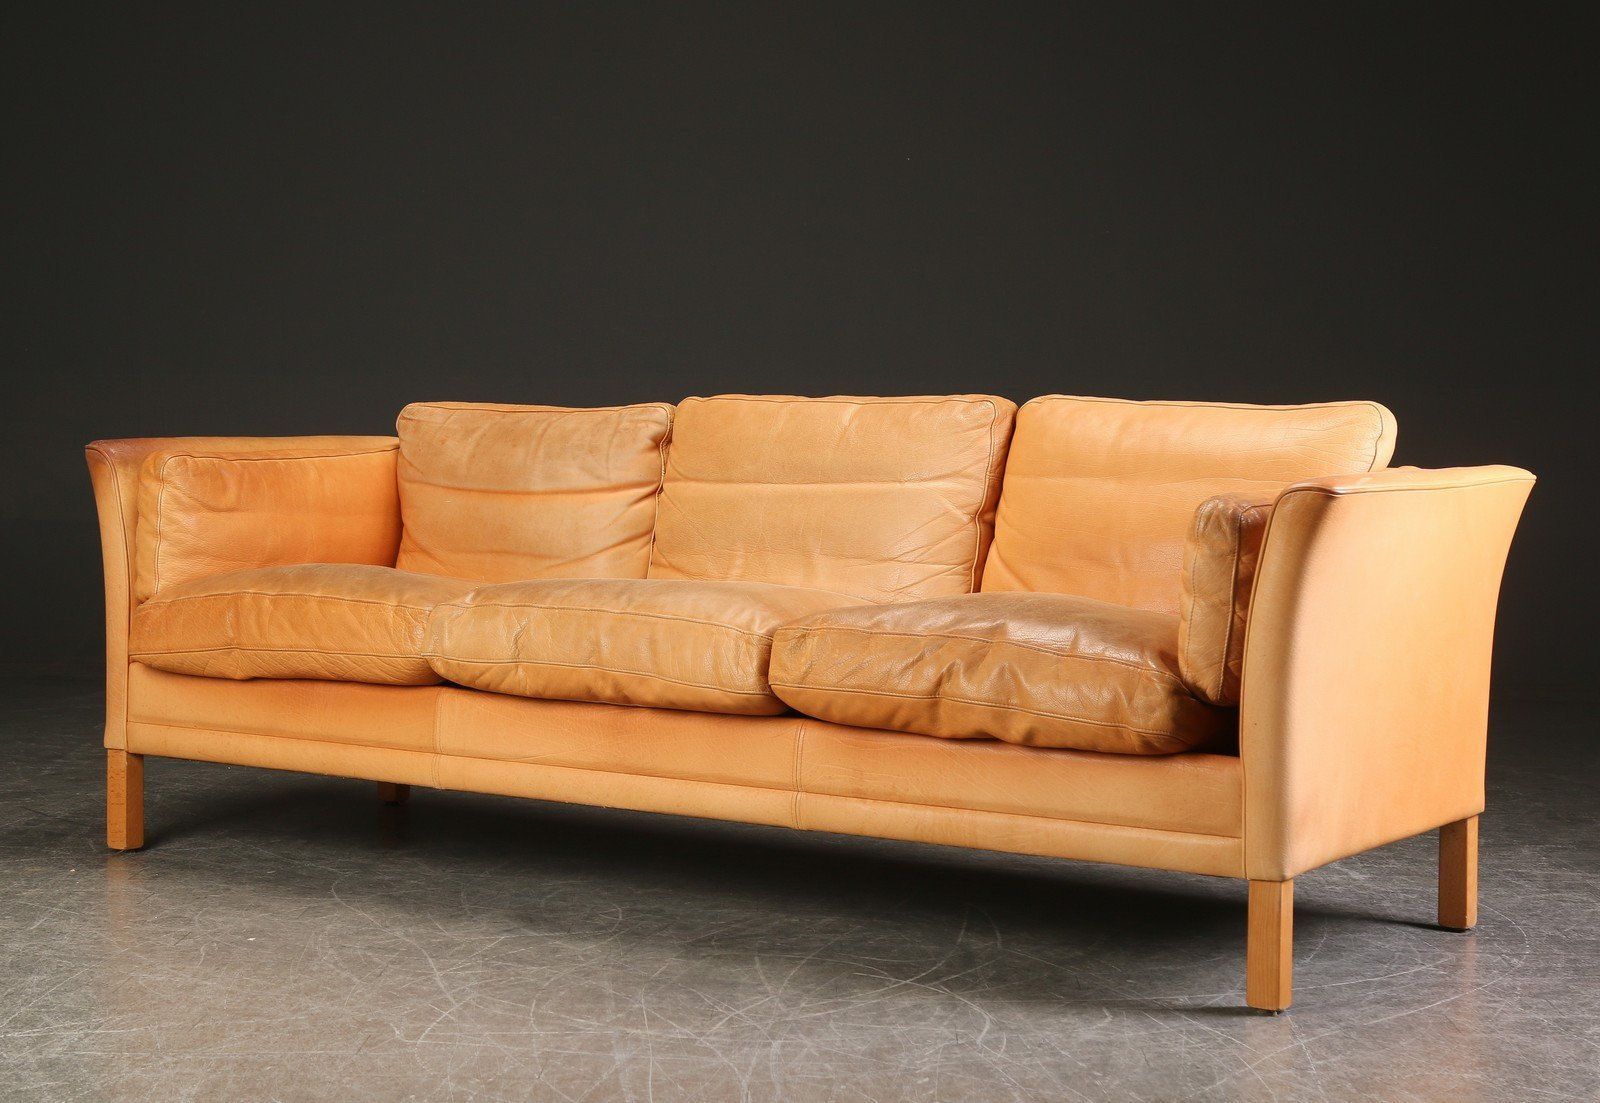 Lovely 3 Seater Vintage Leather Sofamogens Hansen, Danish Mid With Regard To Mid Century 3 Seat Couches (View 20 of 20)